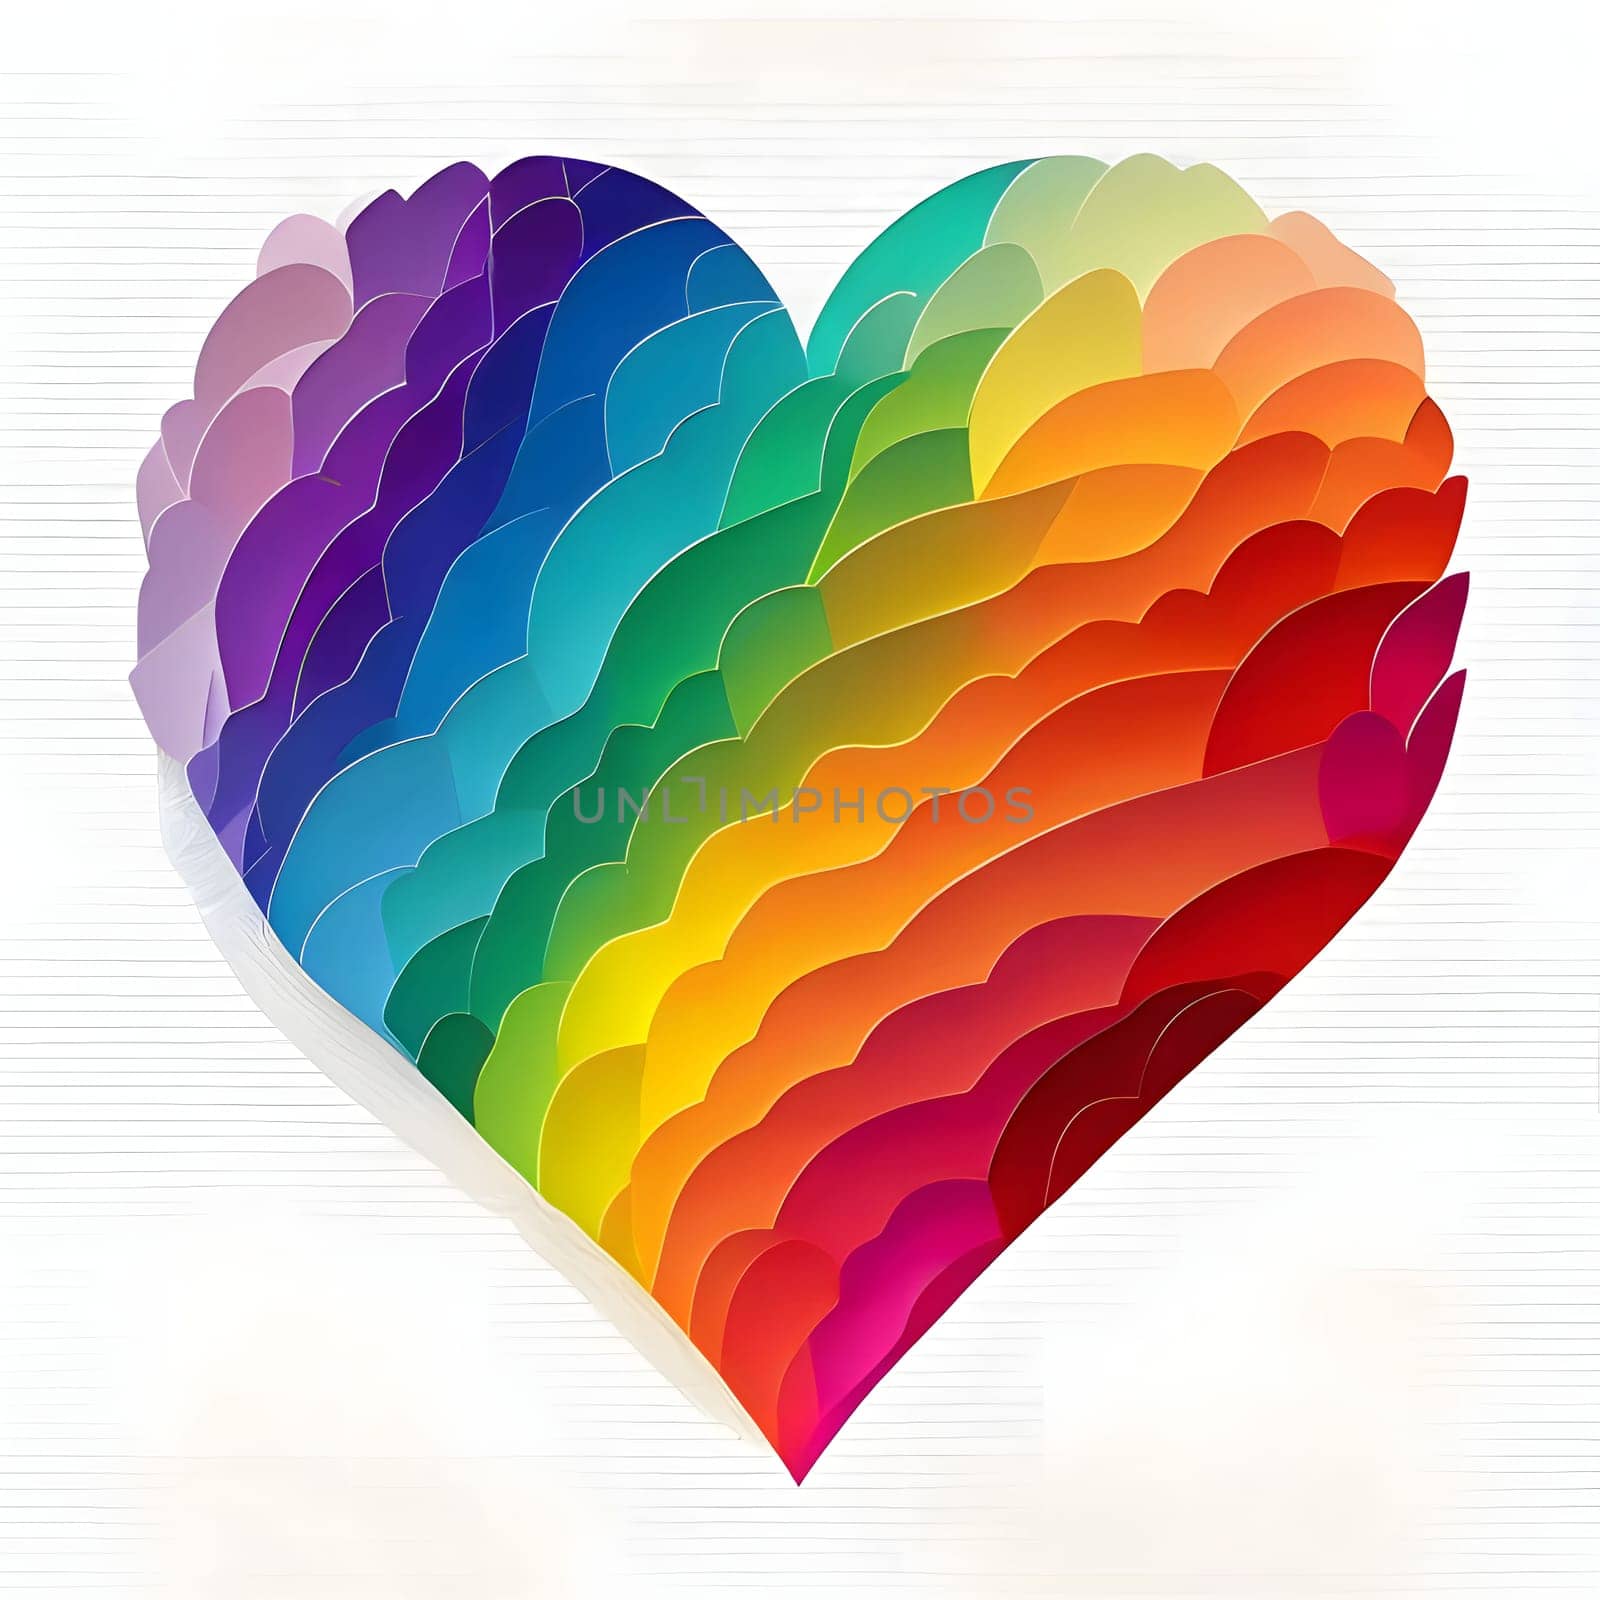 Colorful rainbow heart with colorful palna light background. Heart as a symbol of affection and love. The time of falling in love and love.